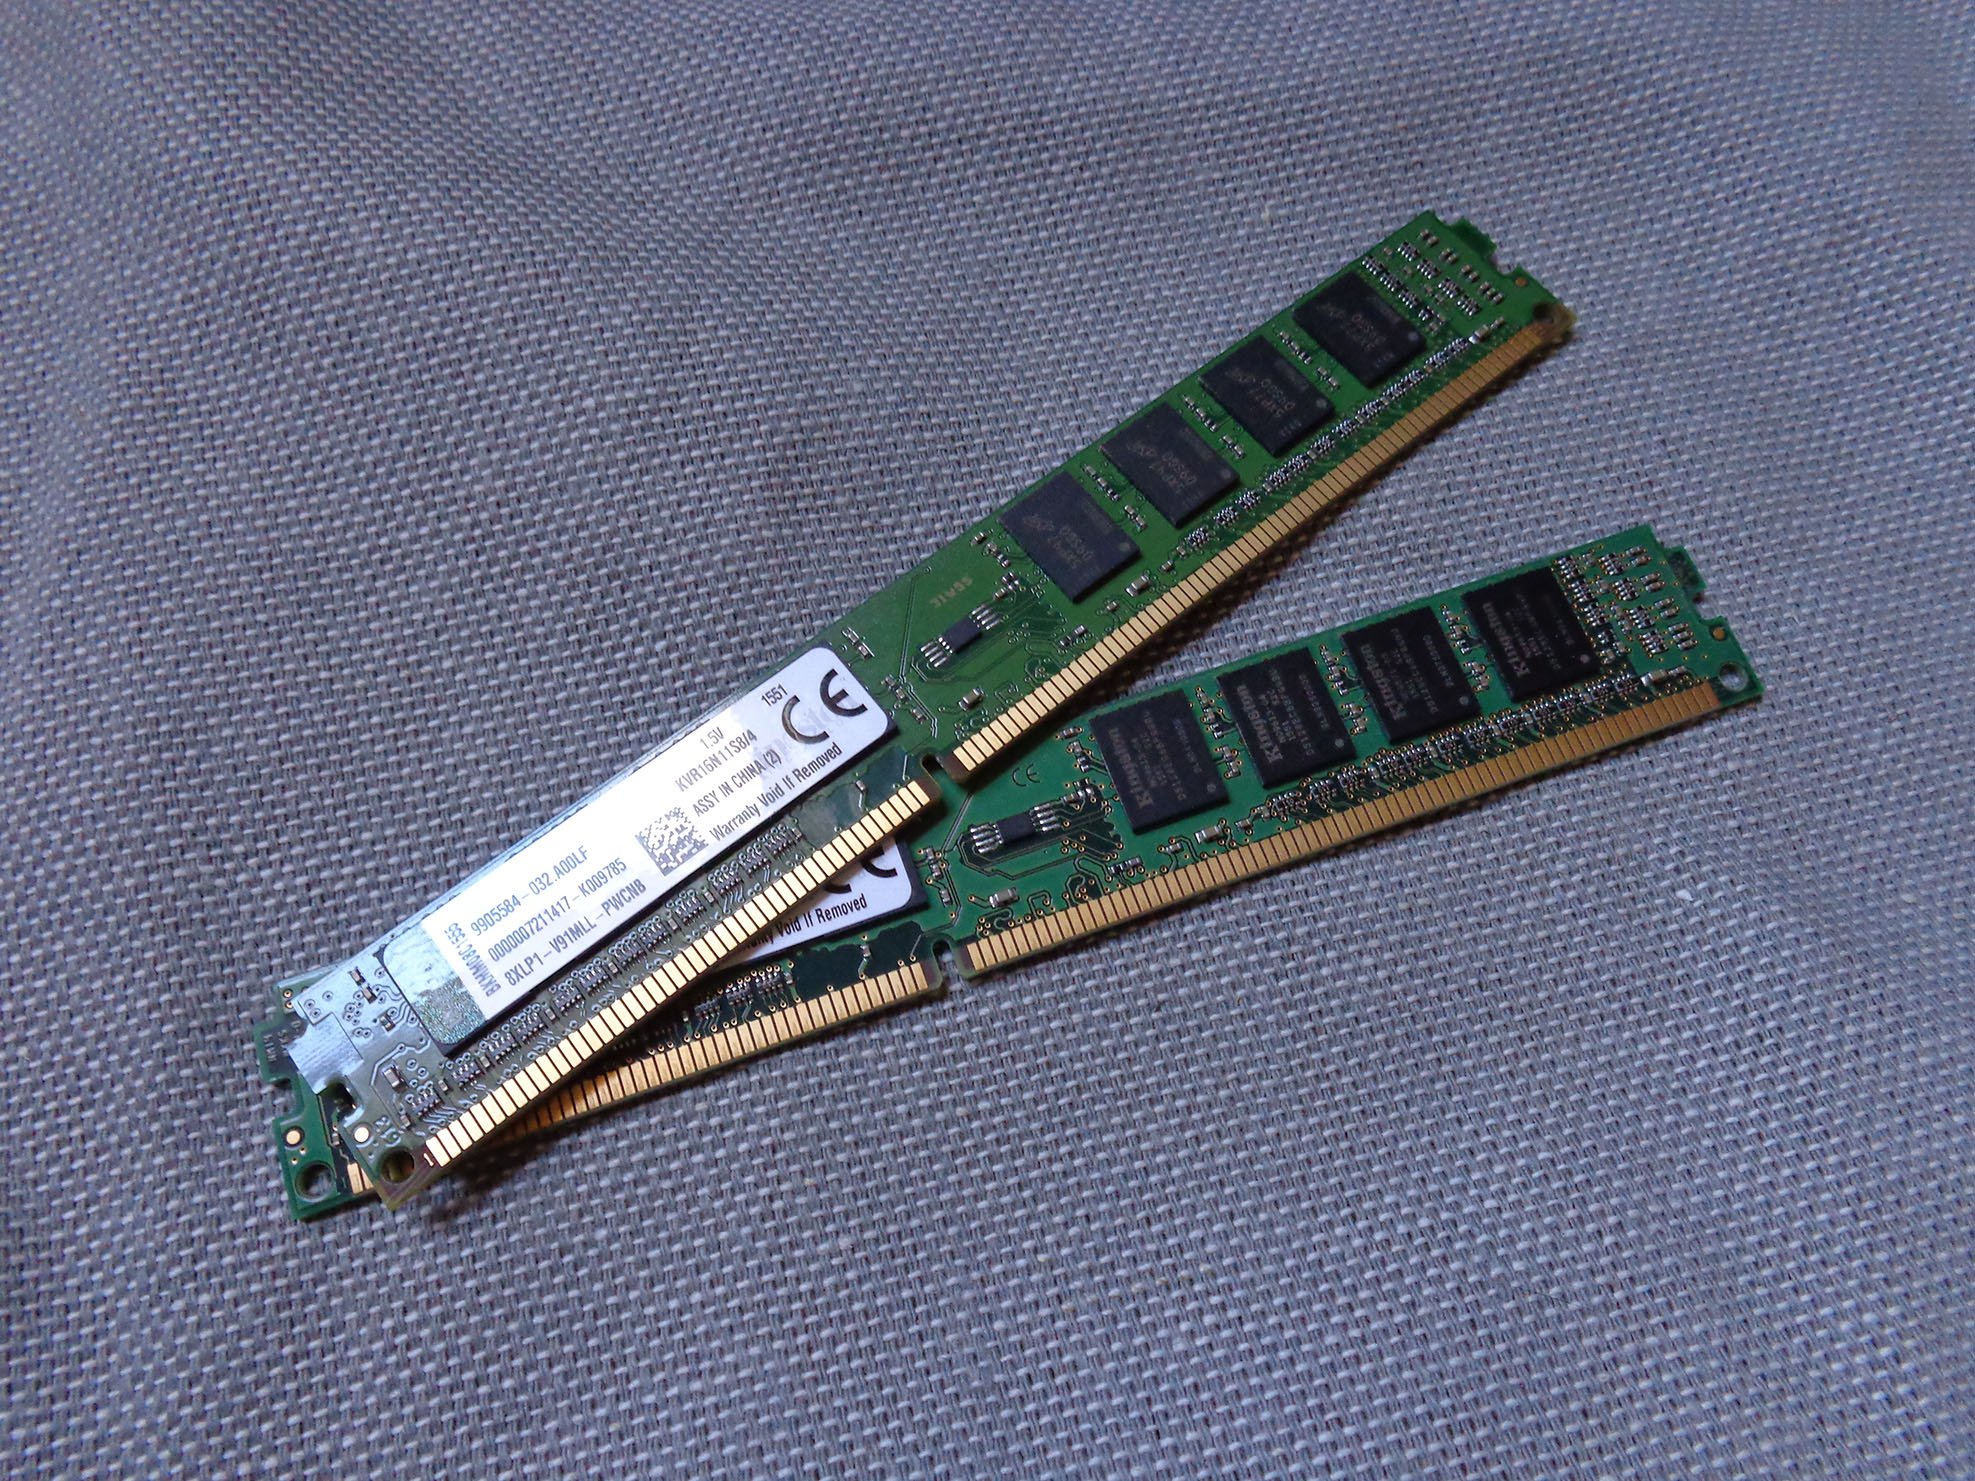 What are some features of DDR RAM?